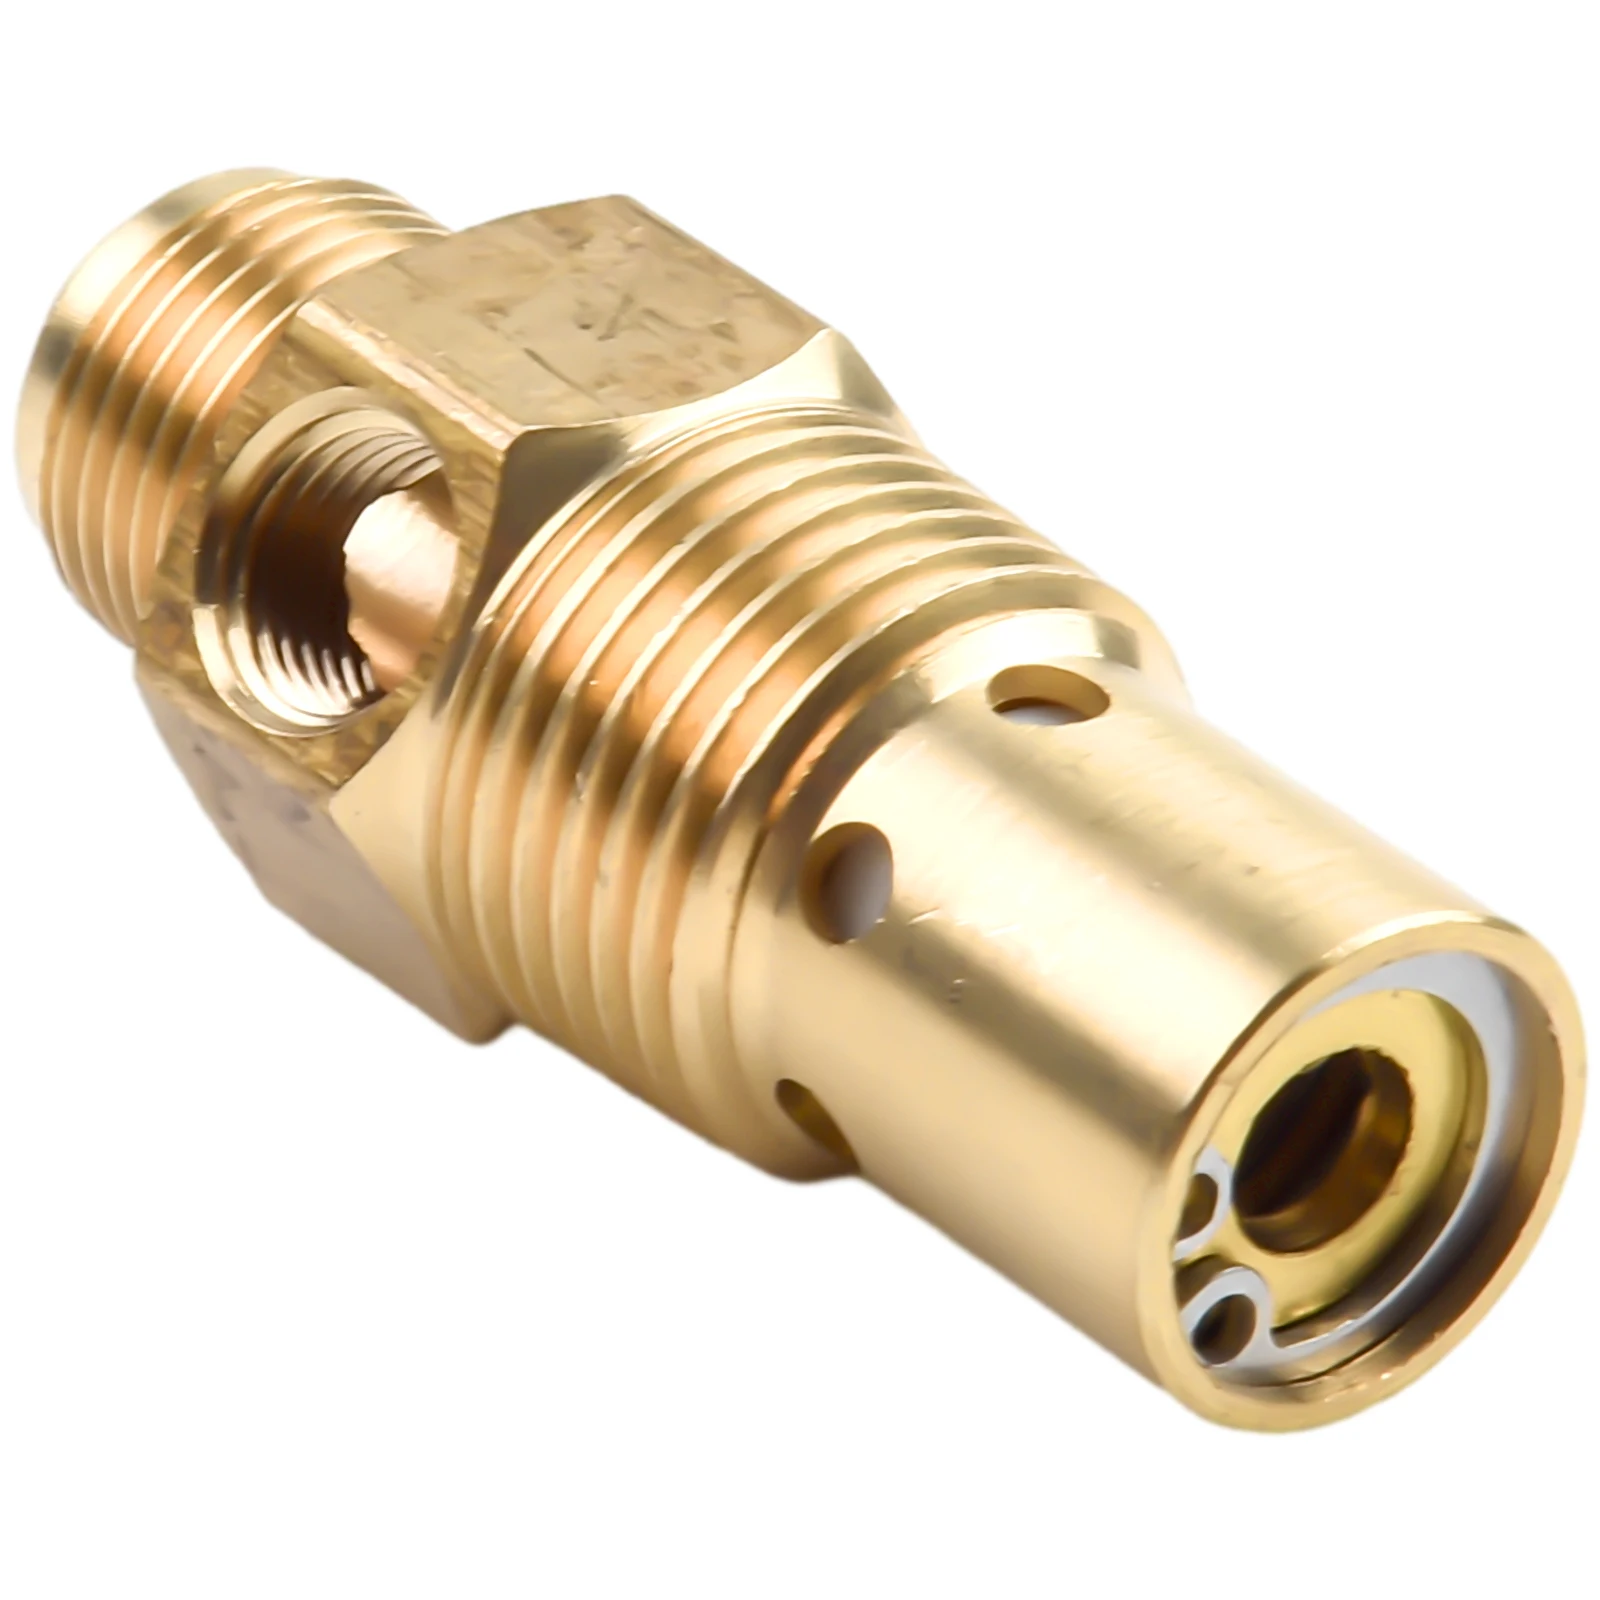 Brass Check Valve G3/8 Air Compressor Male Threaded NPT×1/2In For Air Compressor Replacement Radiator Check Valve brass check valve g3 8 air compressor male threaded npt×1 2in for air compressor replacement radiator check valve